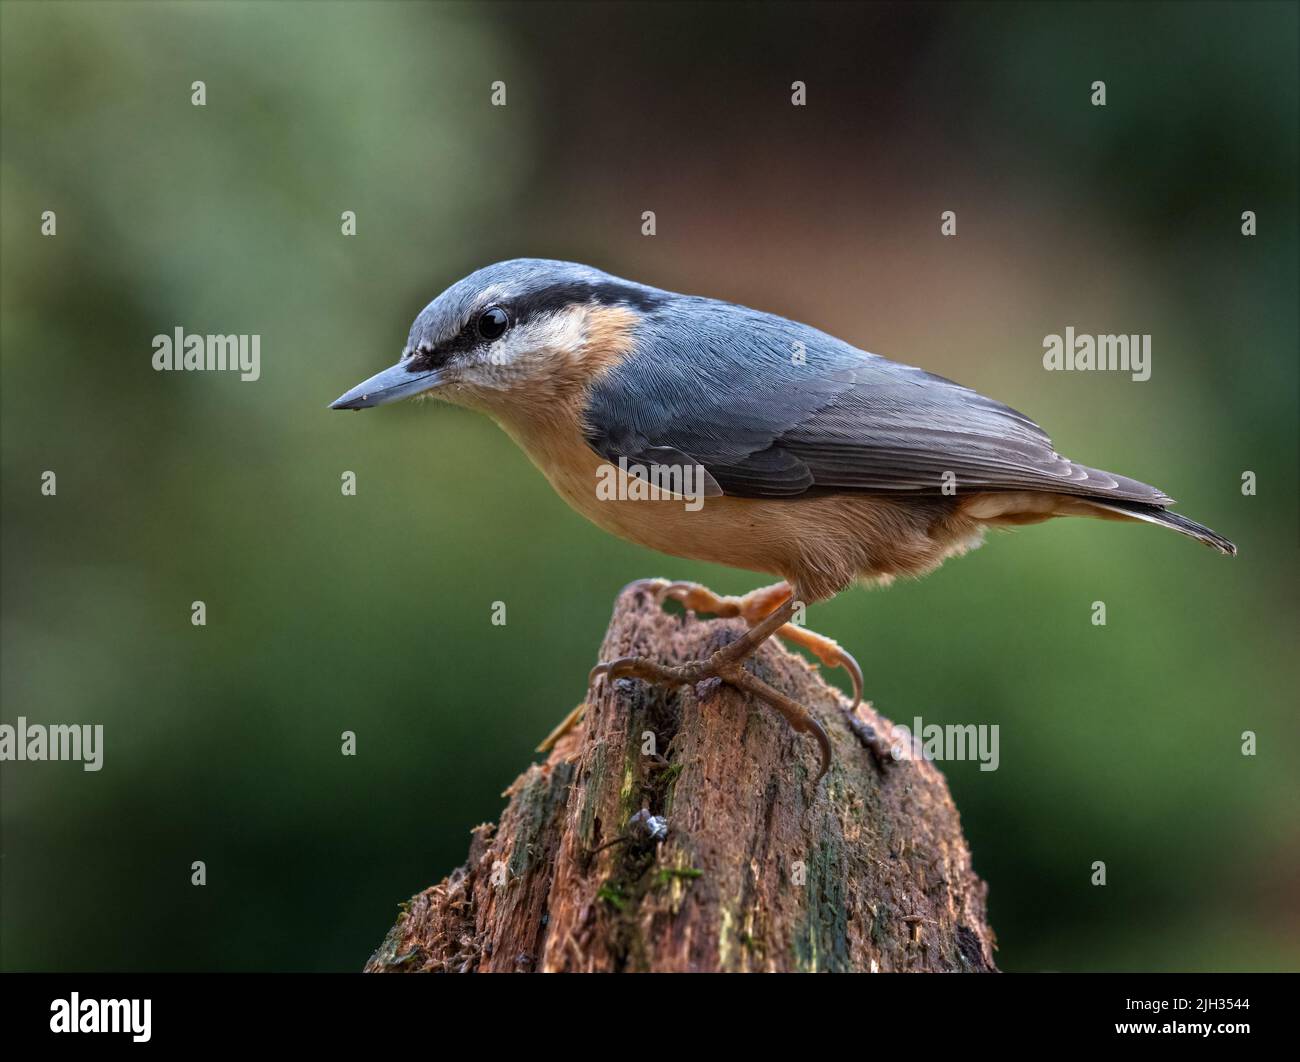 A Nuthatch perched on an old tree root in the garden Stock Photo